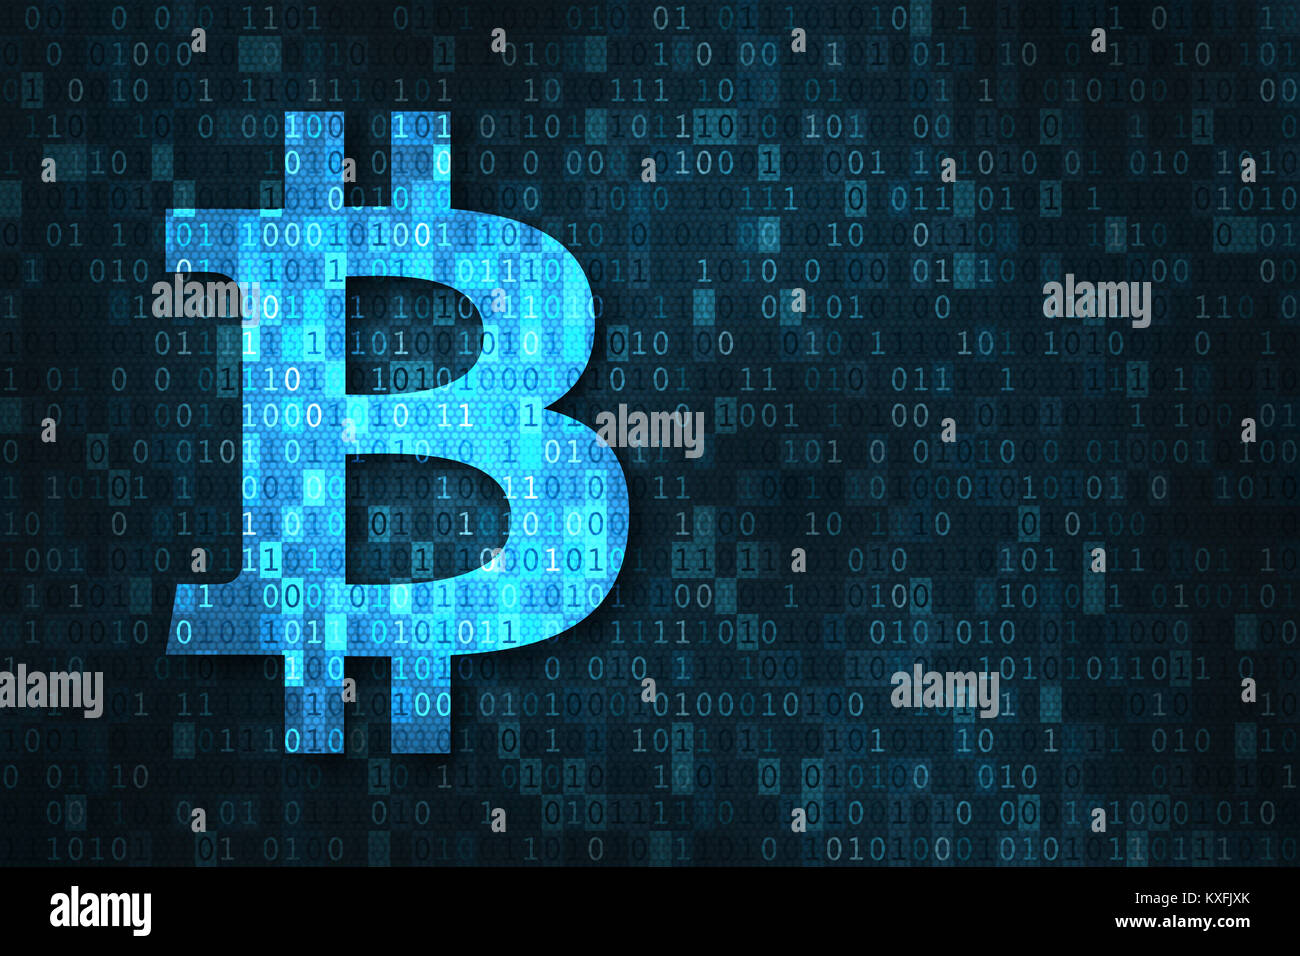 Bitcoin cryptocurrency based on blockchain technology concept with BTC currency symbol over binary digits code matrix background, fintech and financia Stock Photo